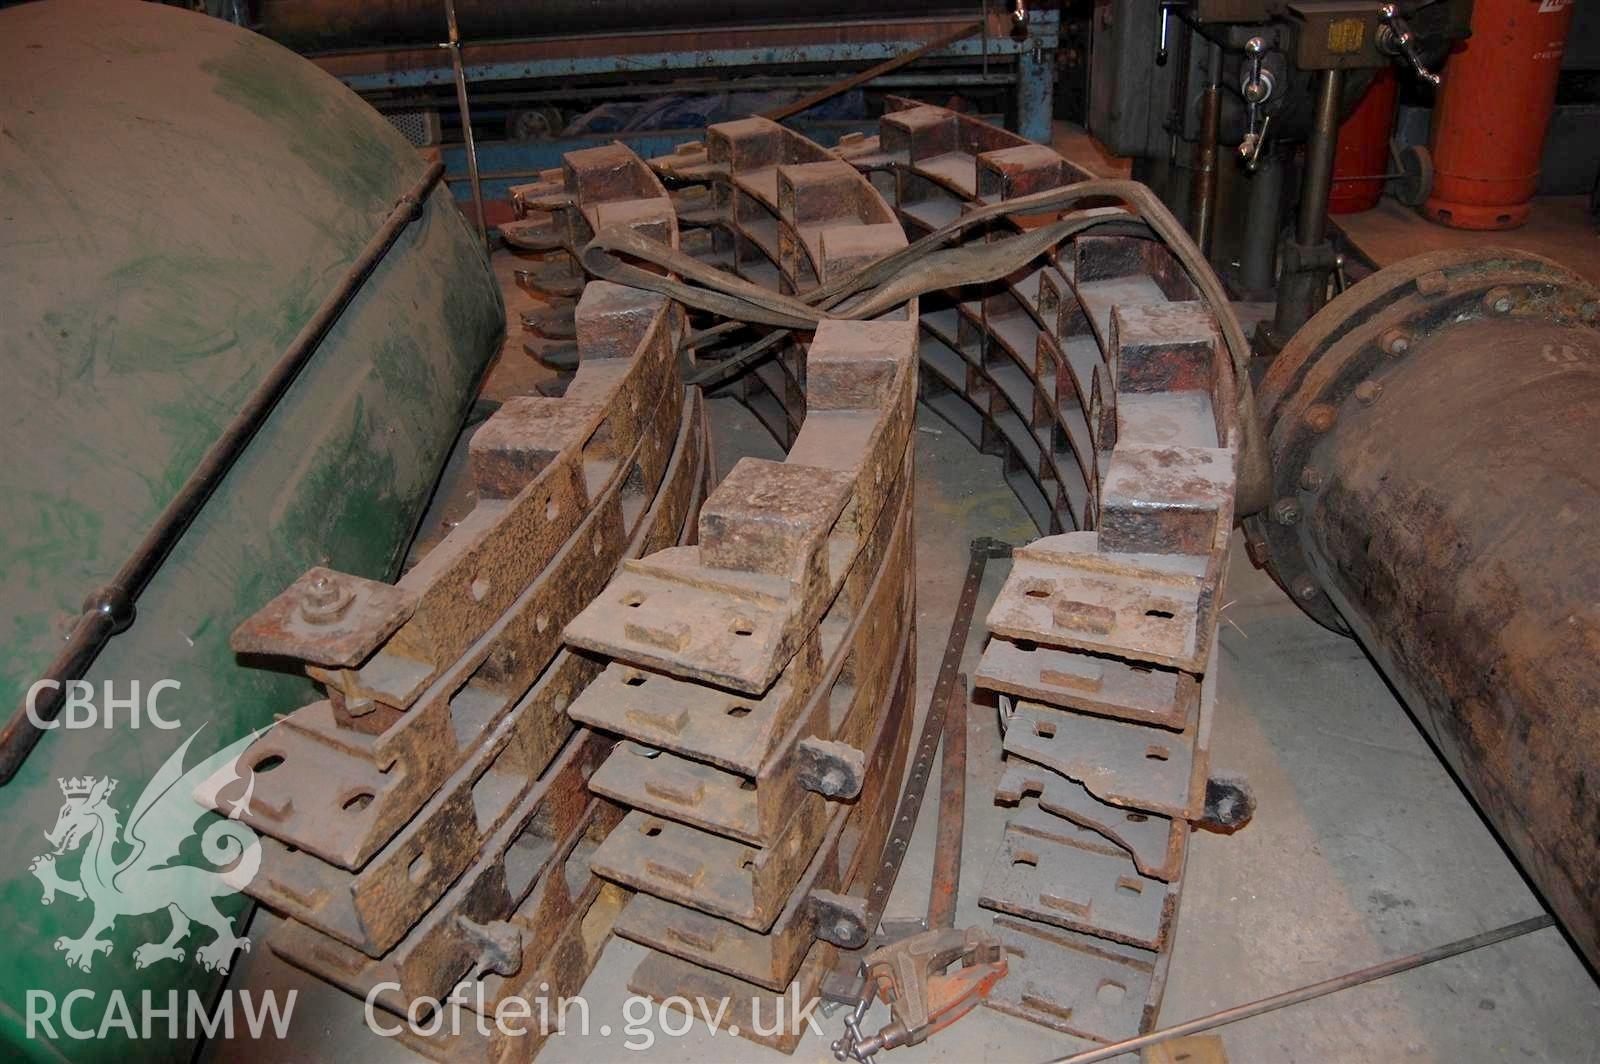 Digital image relating to Melingriffith Water Pump: Wheel rim sections stacked ready for cleaning.